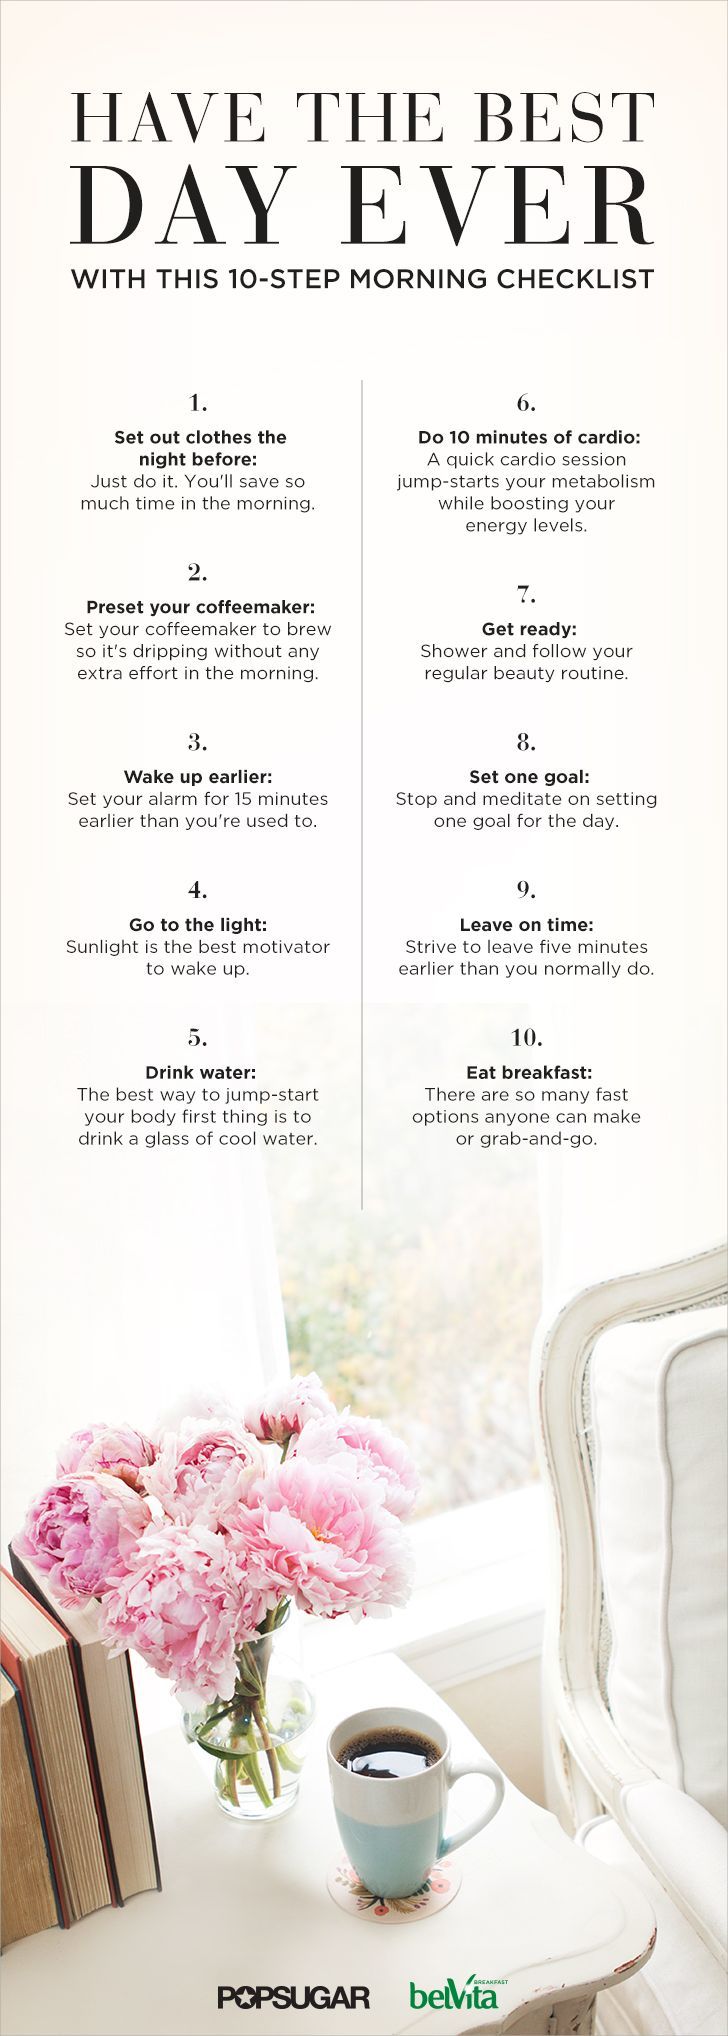 Have the Best Day Ever With This 10-Step Morning Checklist